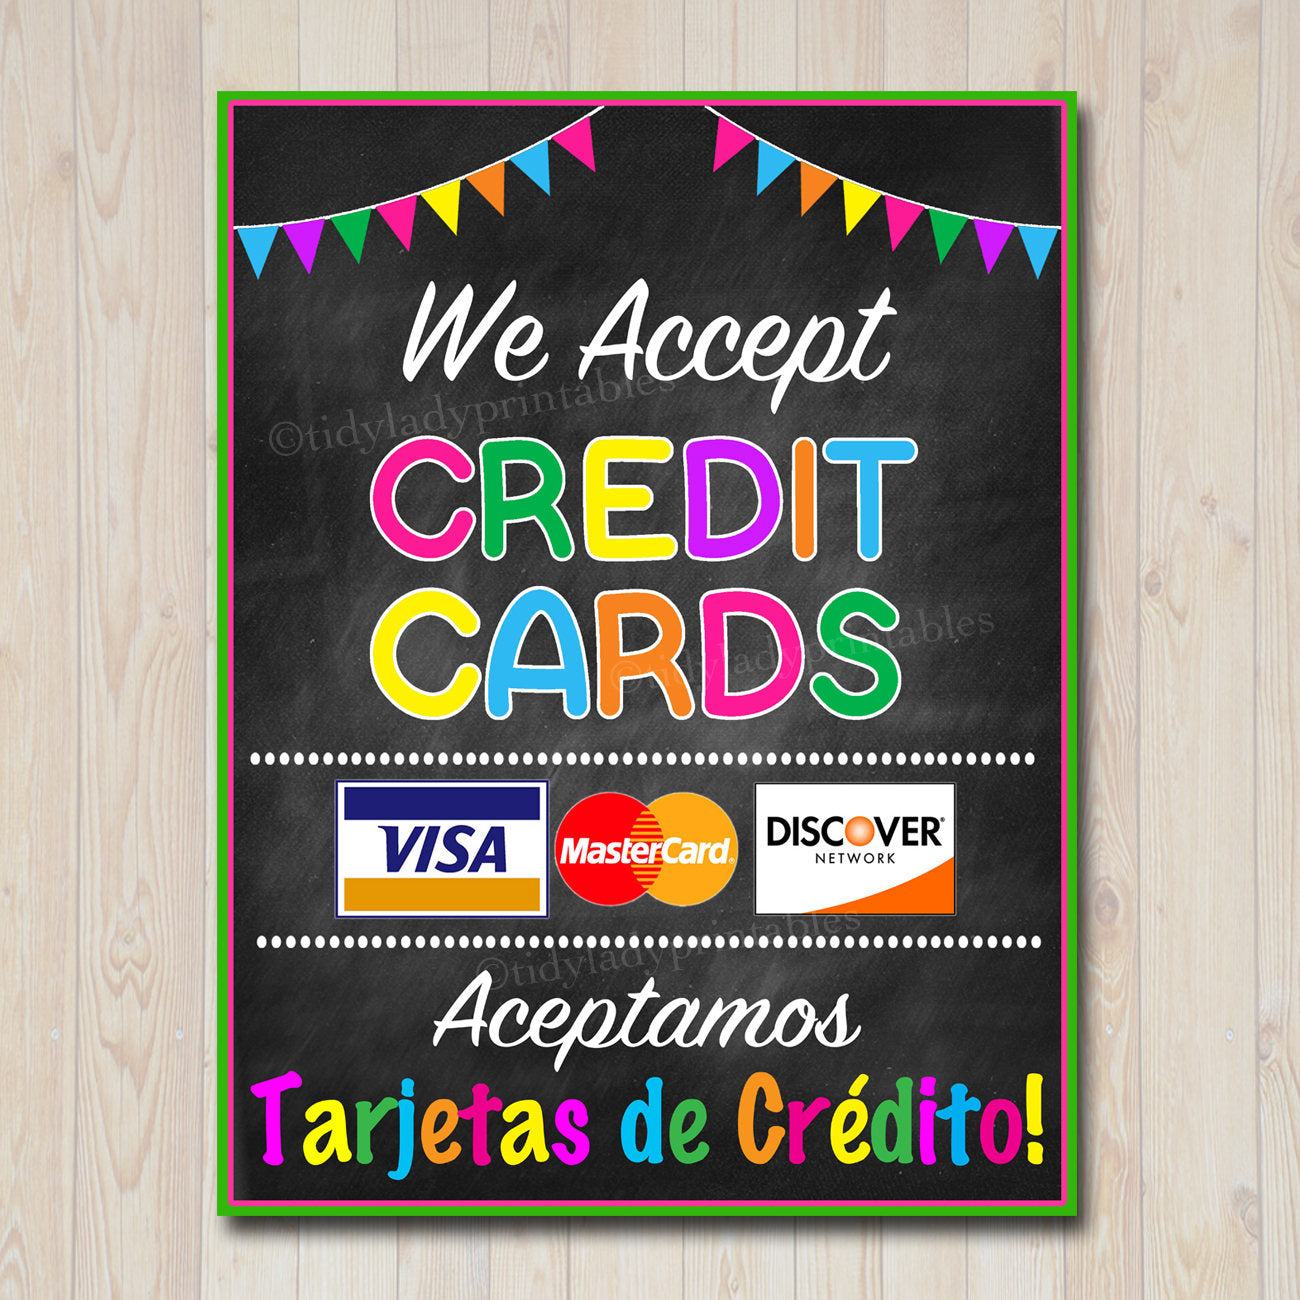 printable-credit-card-sign-fundraising-booth-bake-sale-cookie-booth